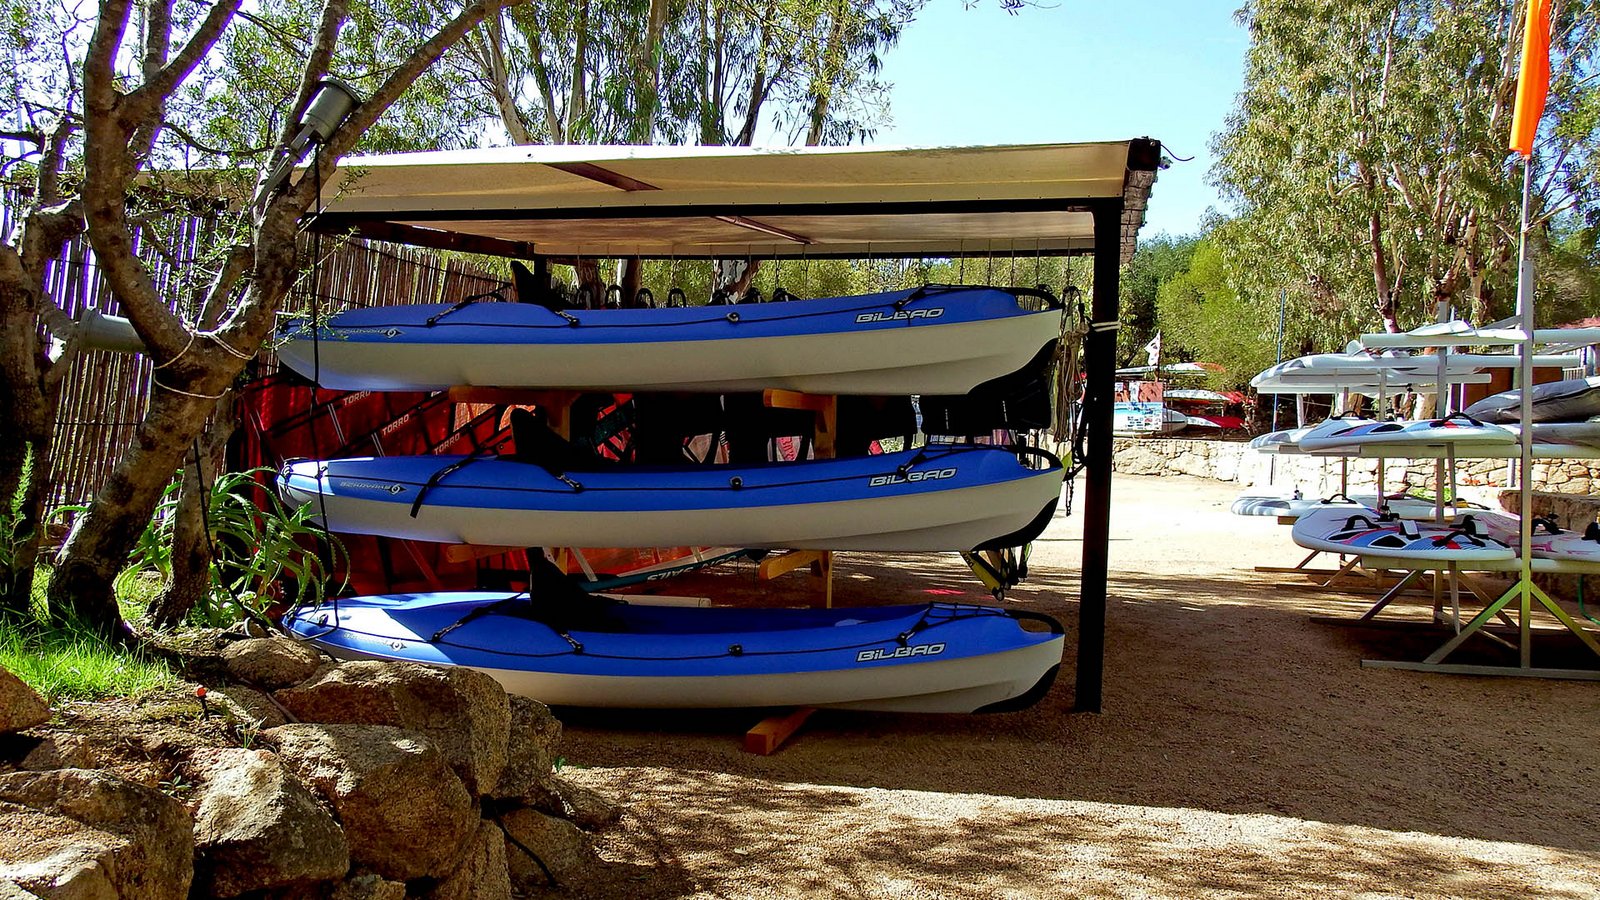 Sit-on-top kayaks for maximum stability and safety